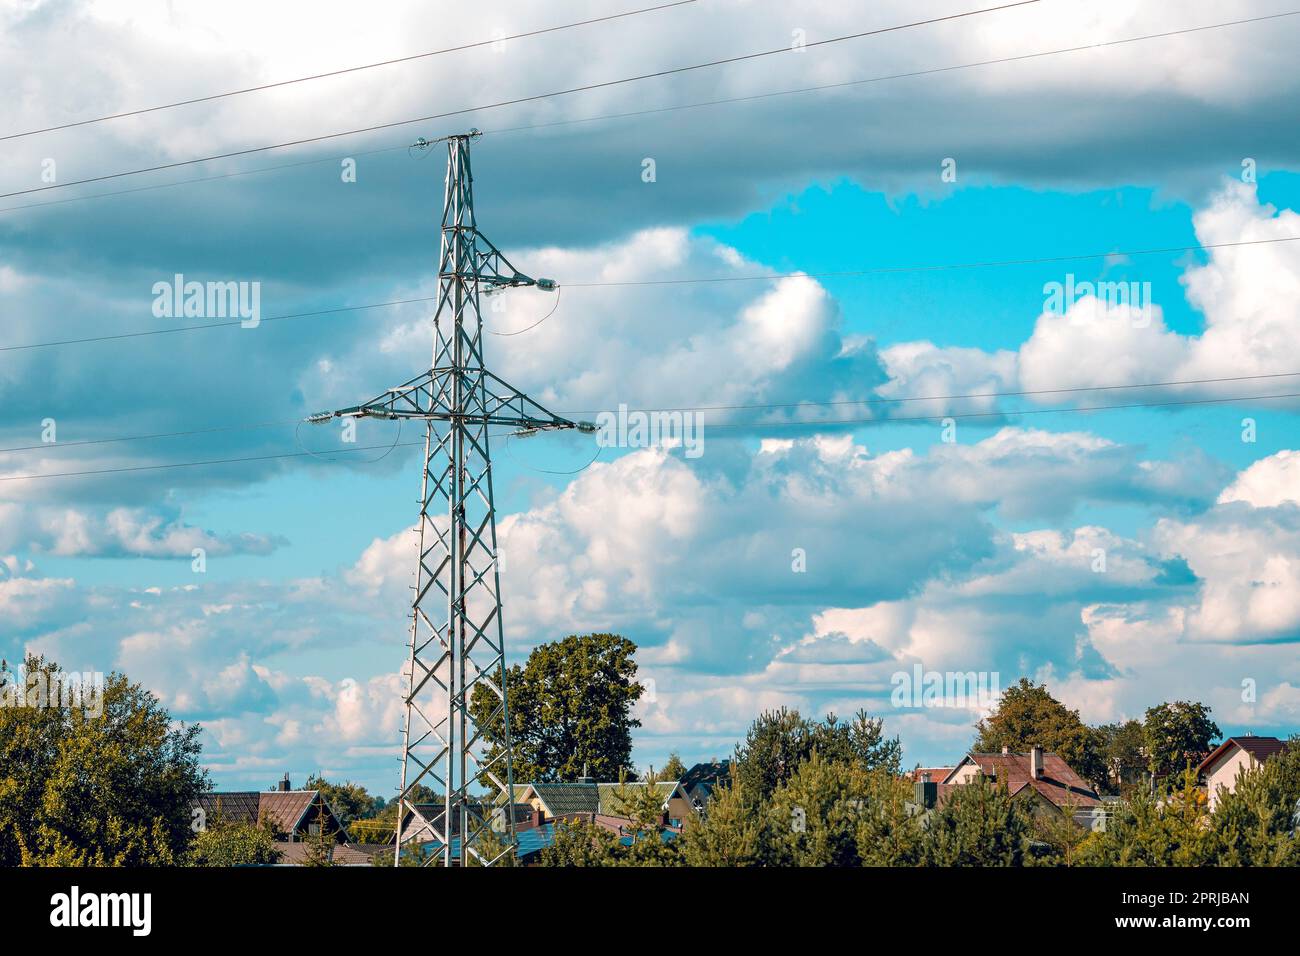 Power lines near a small town Stock Photo